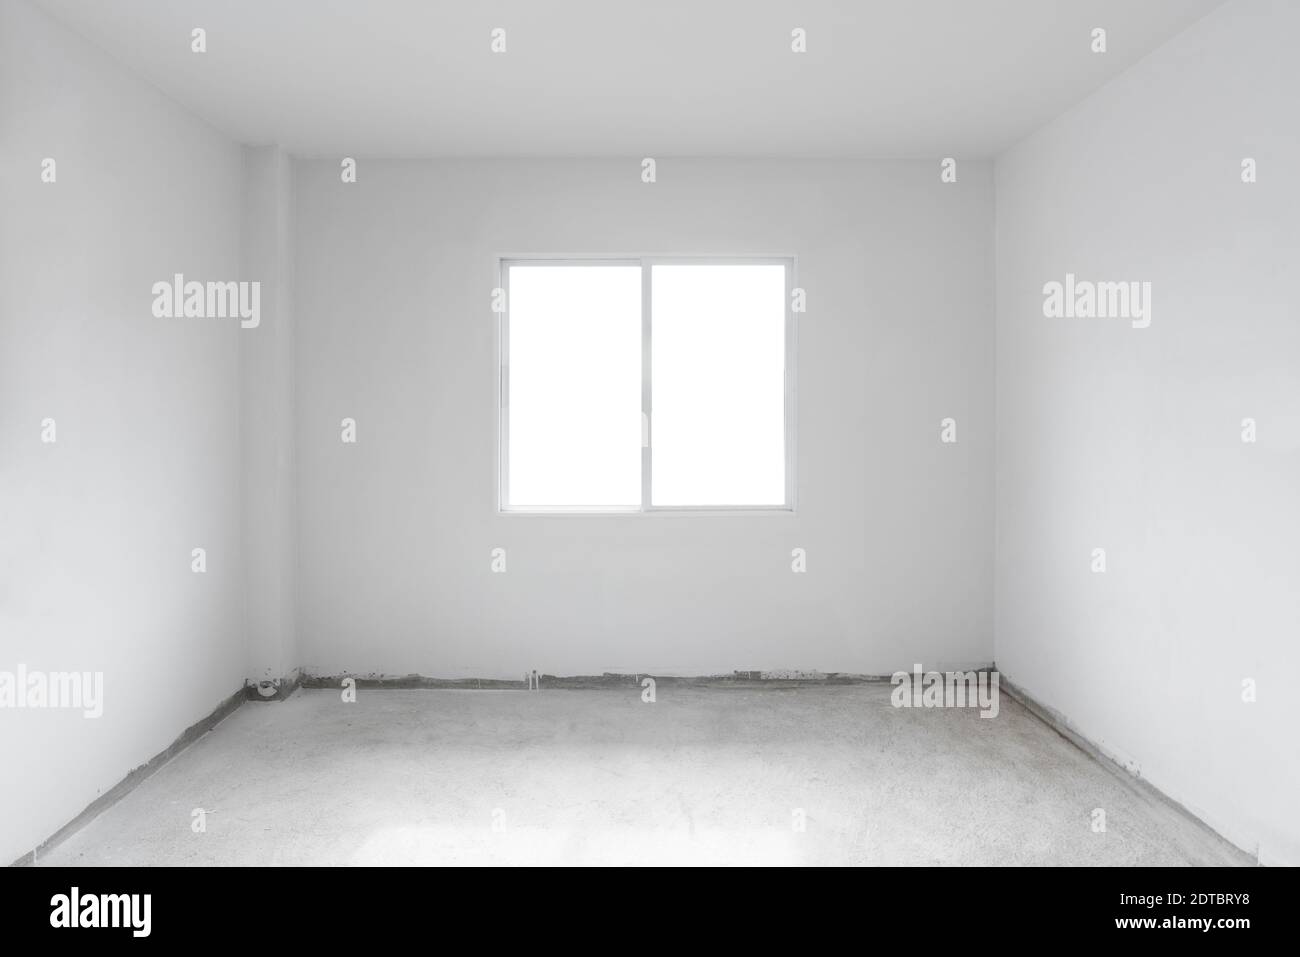 Concrete cement floor with white wall and window. Under construction empty room interior Stock Photo